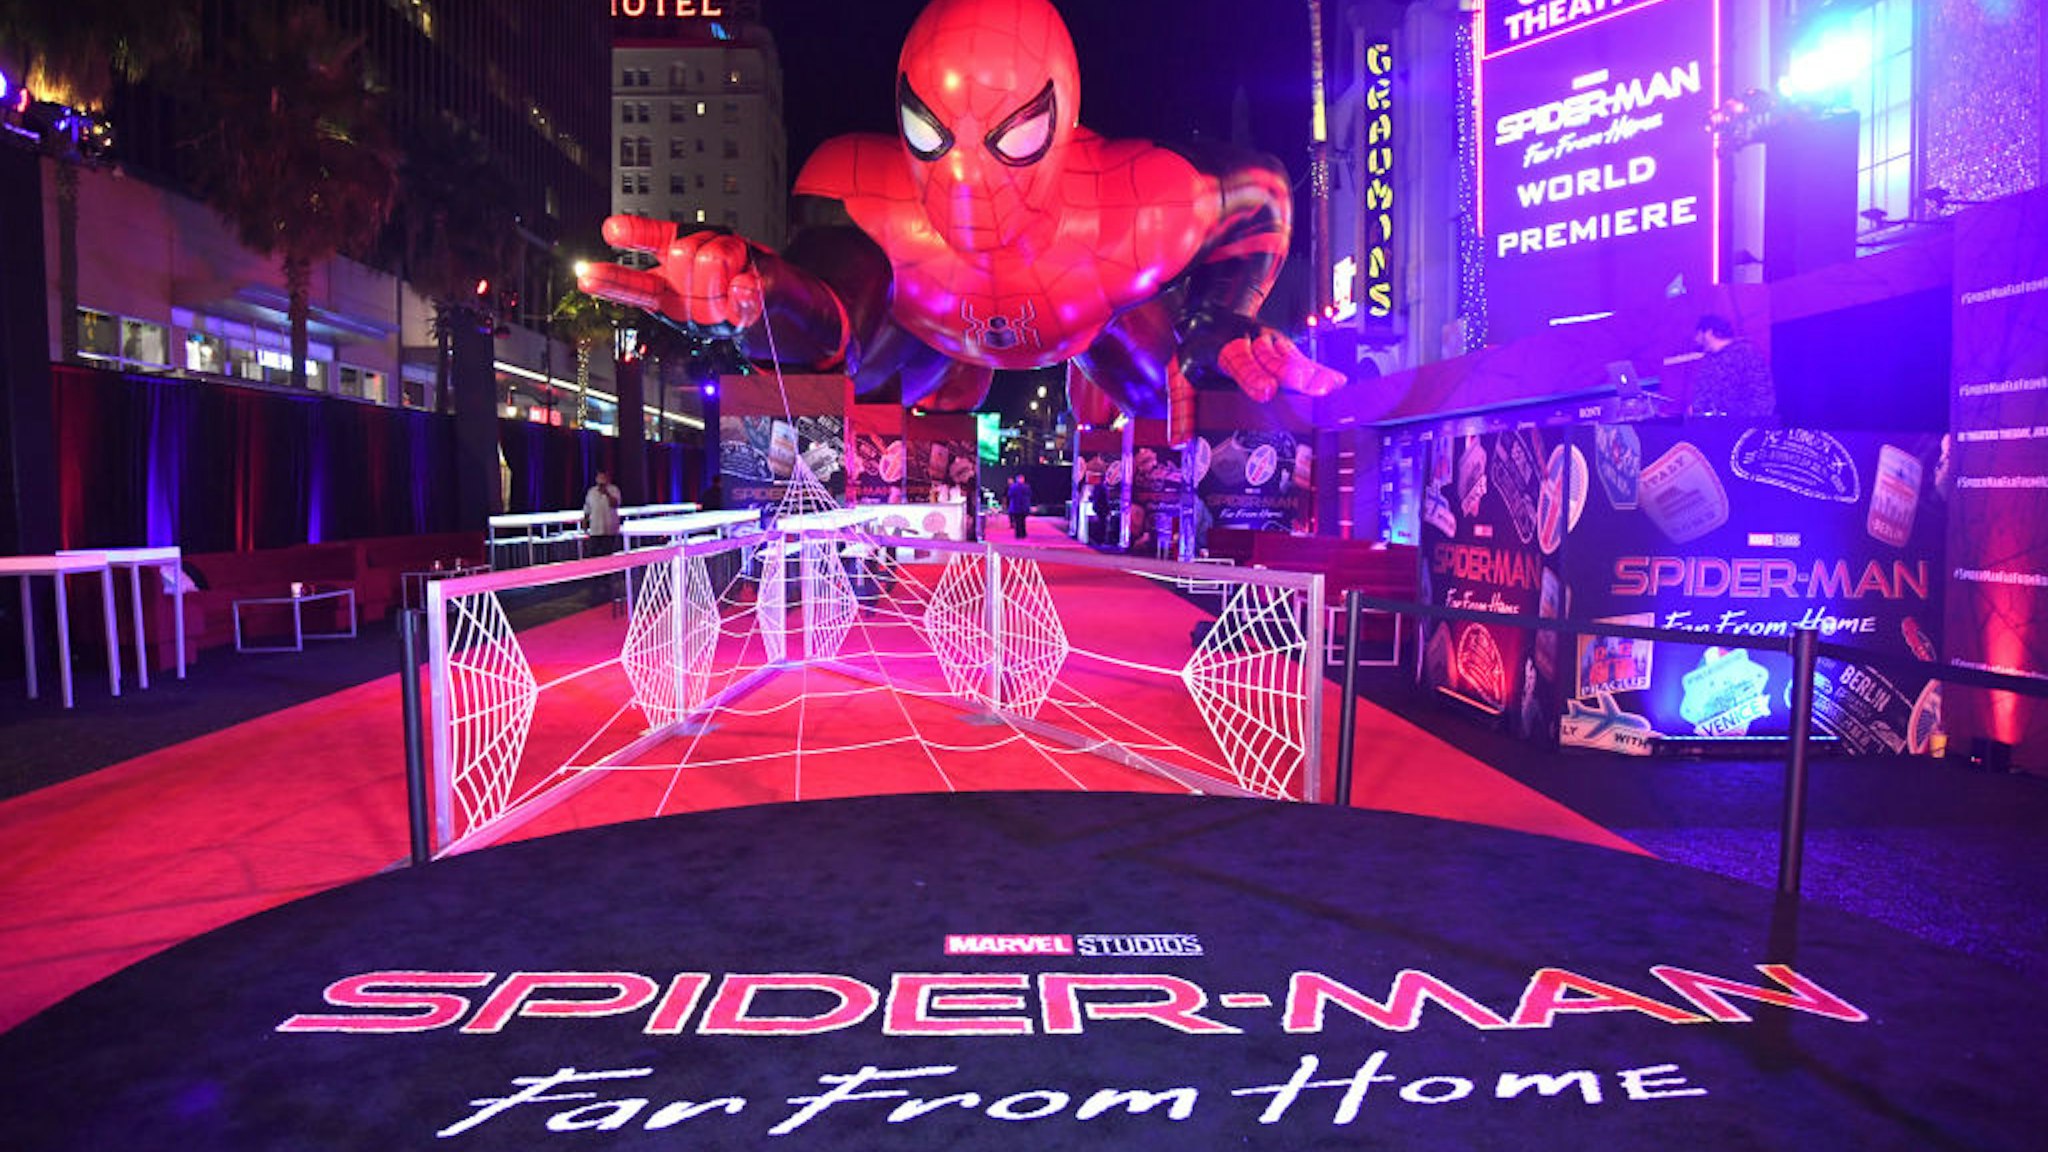 HOLLYWOOD, CALIFORNIA - JUNE 26: A general view is shown at the after party for the premiere of Sony Pictures' "Spider-Man: Far From Home" on June 26, 2019 in Hollywood, California. (Photo by Kevin Winter/Getty Images)